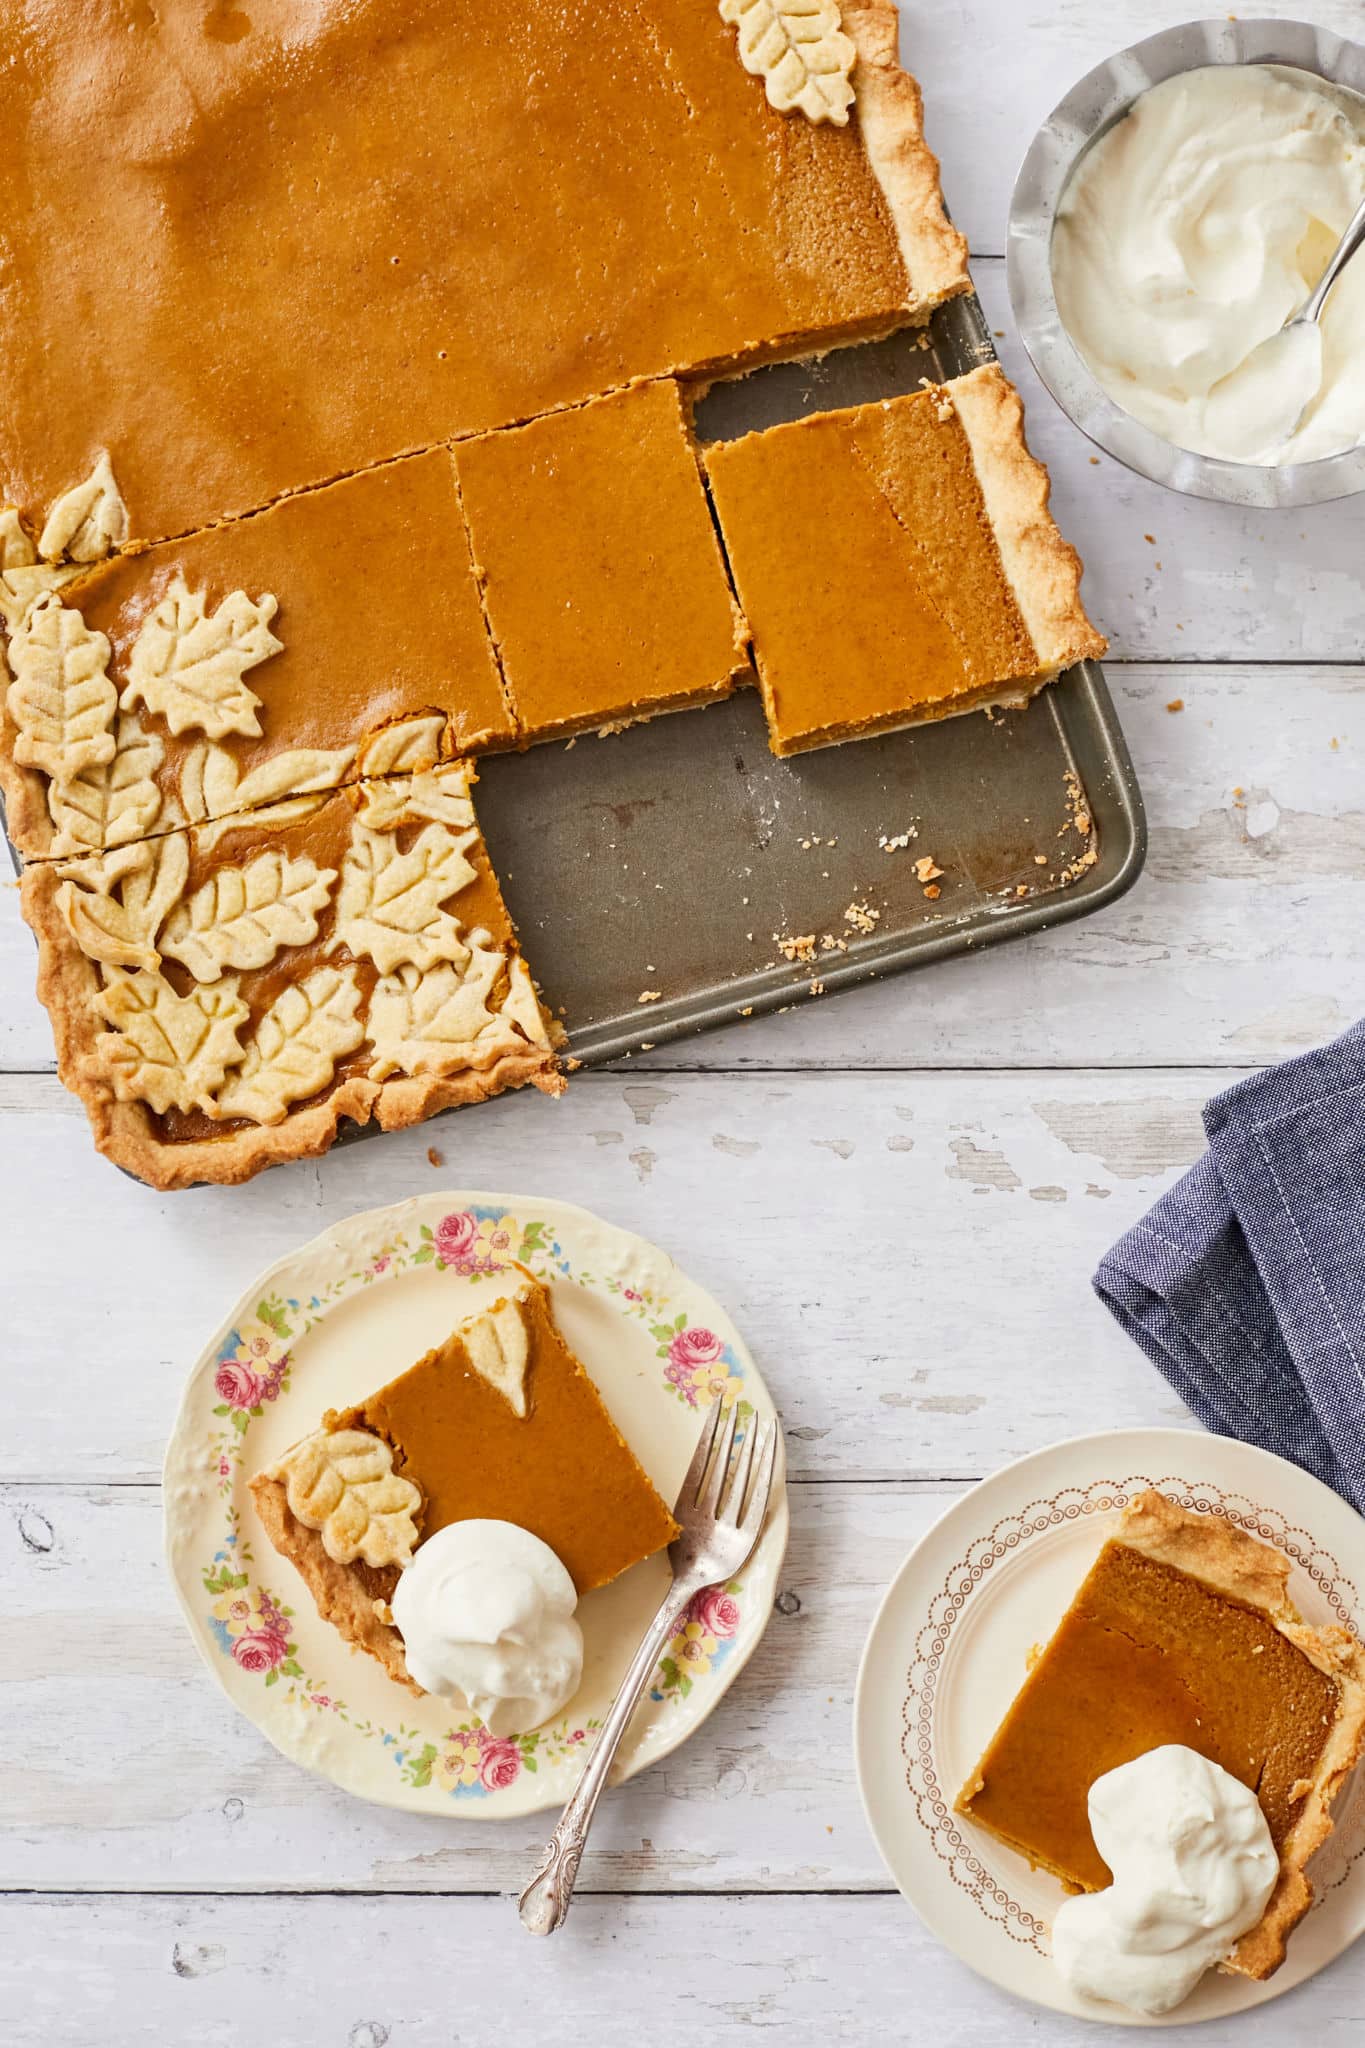 Slices of pumpkin pie straight from the slab.